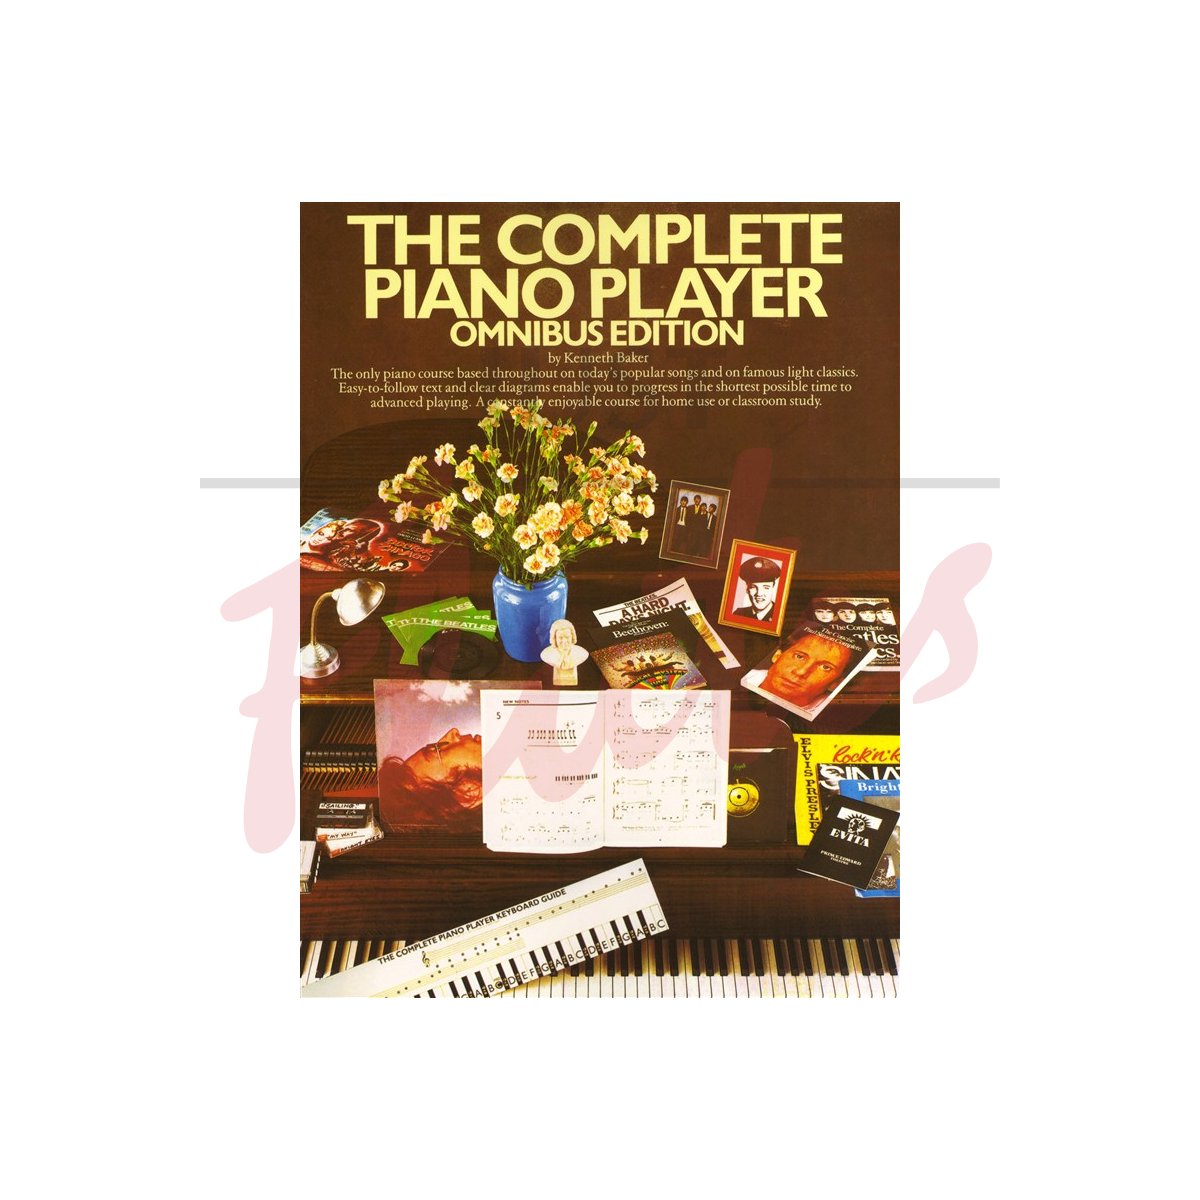 The Complete Piano Player Omnibus Edition